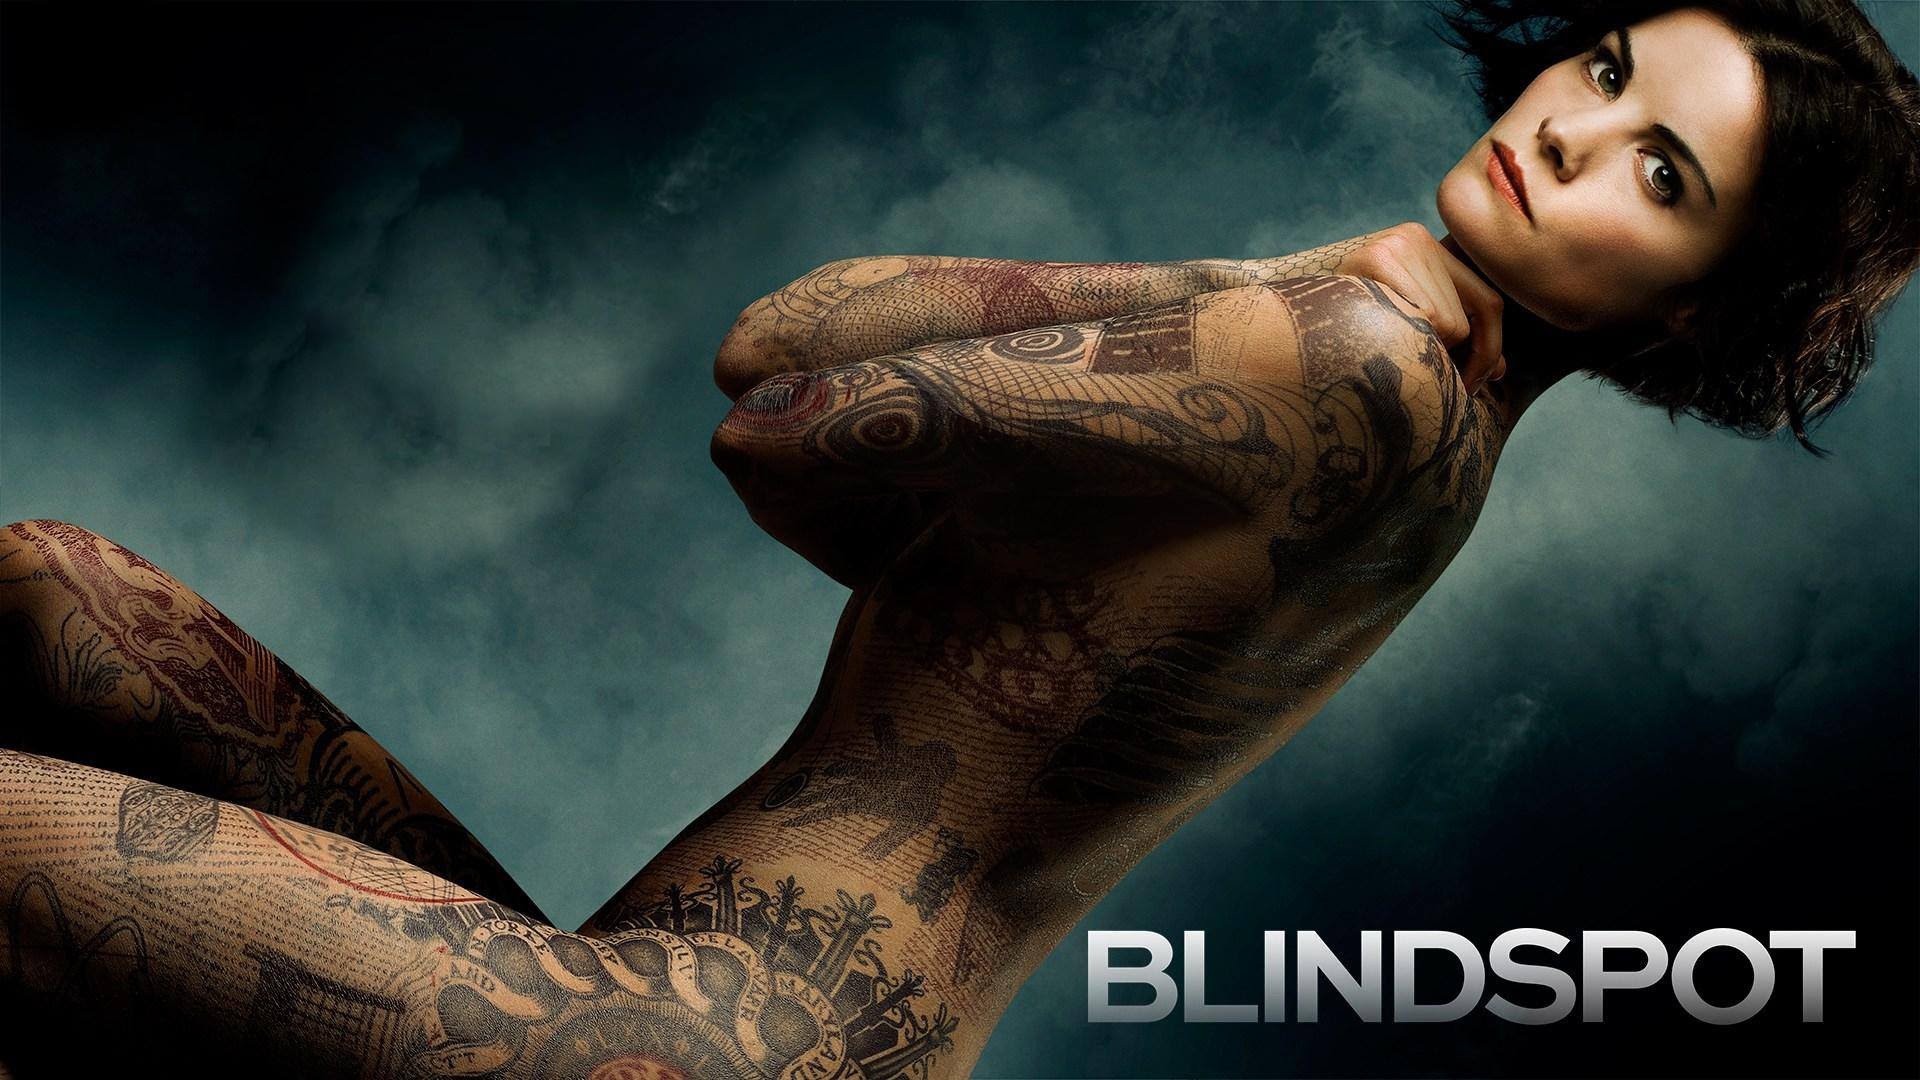 Amazing Blindspot Pictures & Backgrounds